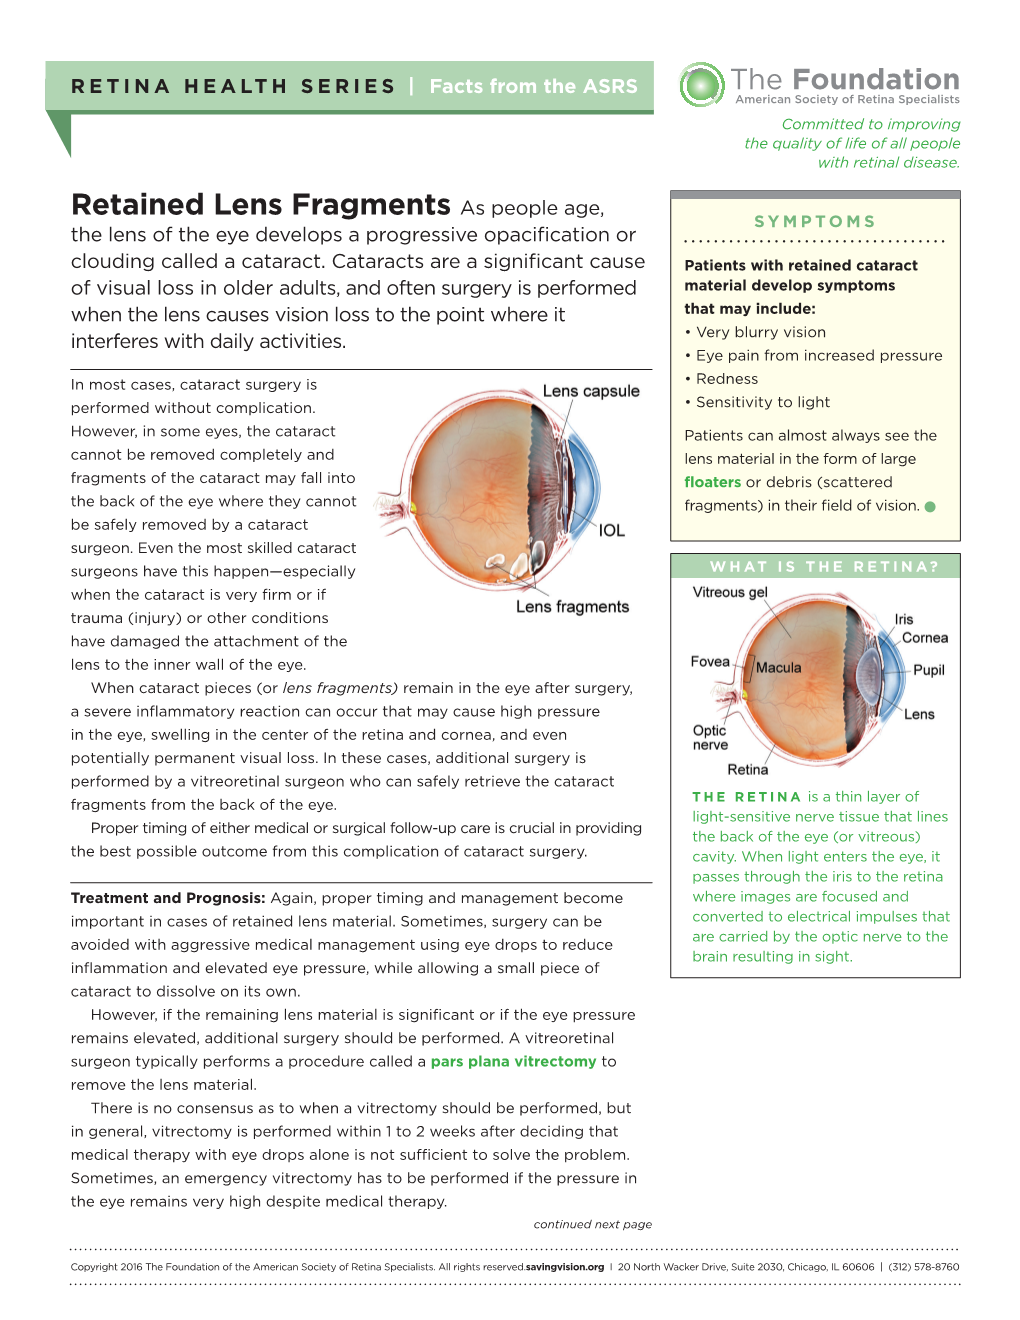 Retained Lens Fragments As People Age, SYMPTOMS the Lens of the Eye Develops a Progressive Opacification Or Clouding Called a Cataract